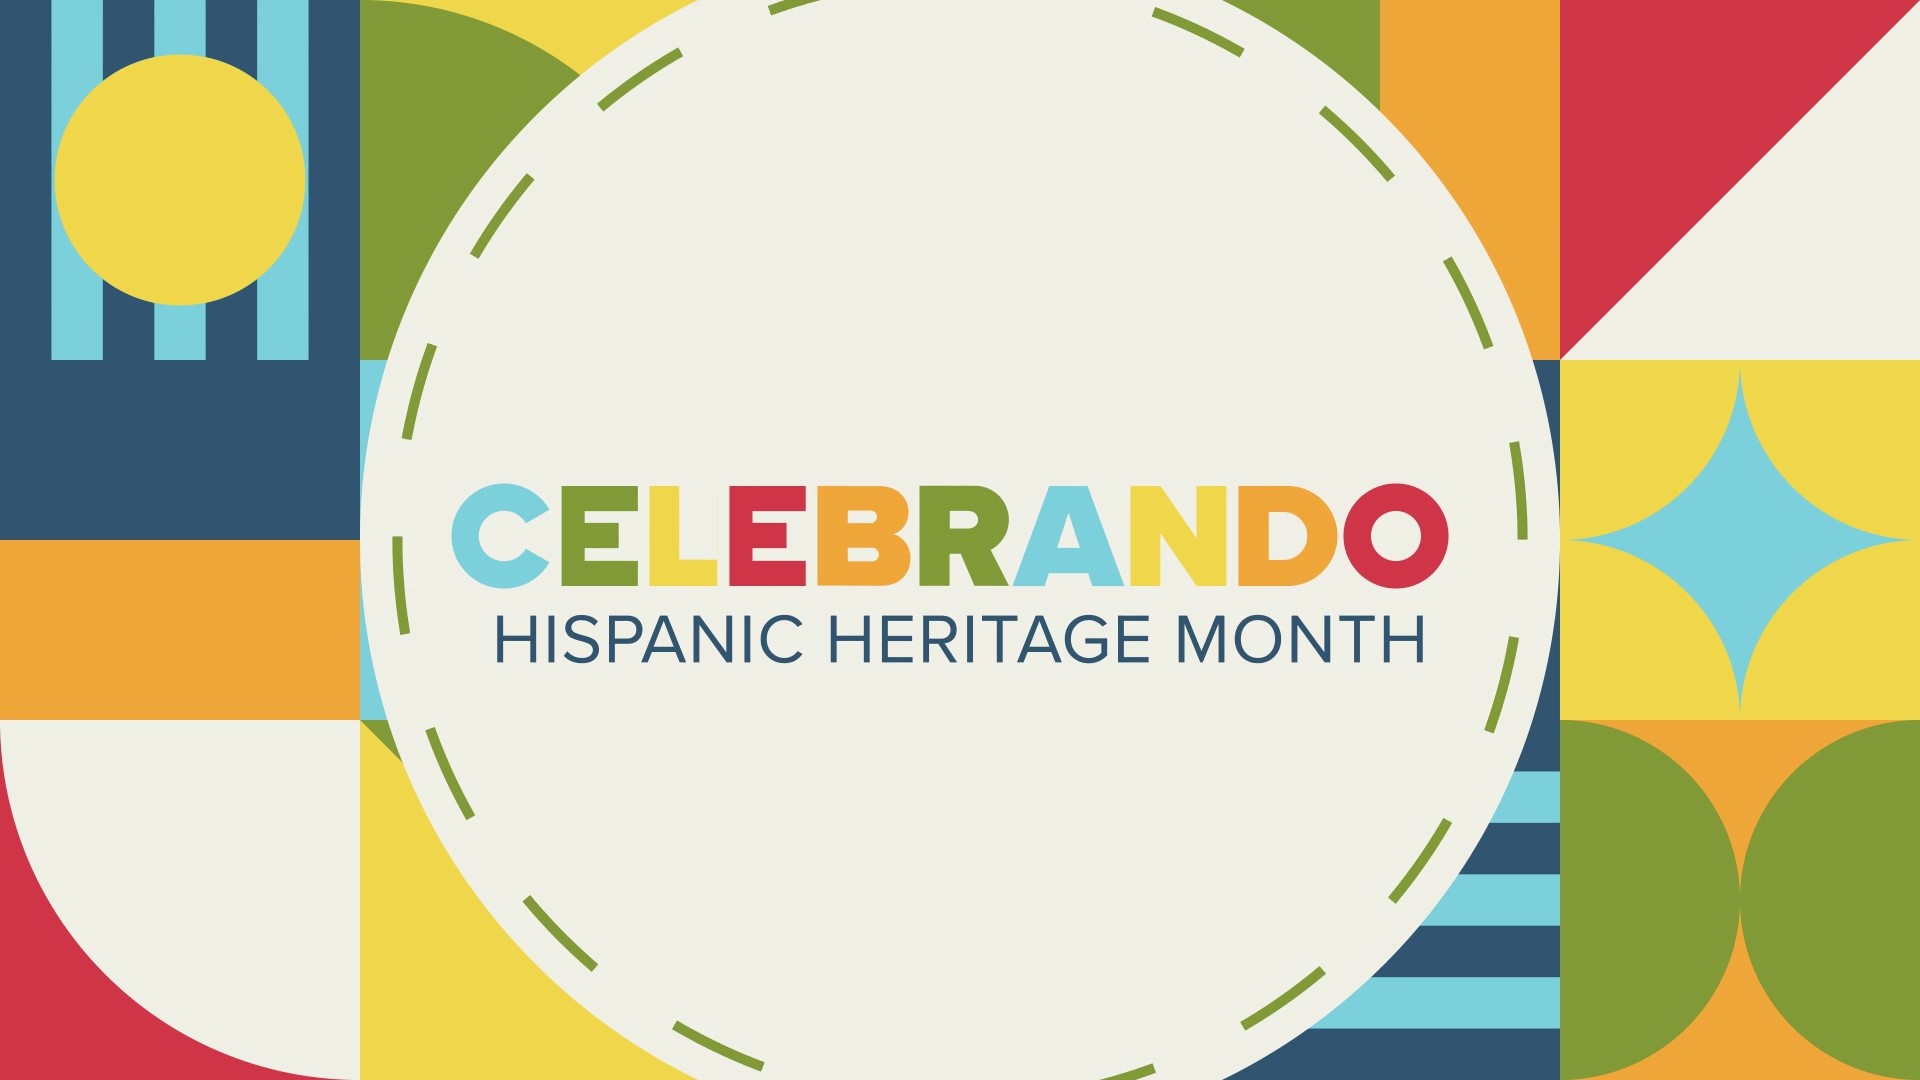 It's National Hispanic Heritage Month in the U.S. Enjoy several stories about the Hispanic and Latino community in Atlanta.